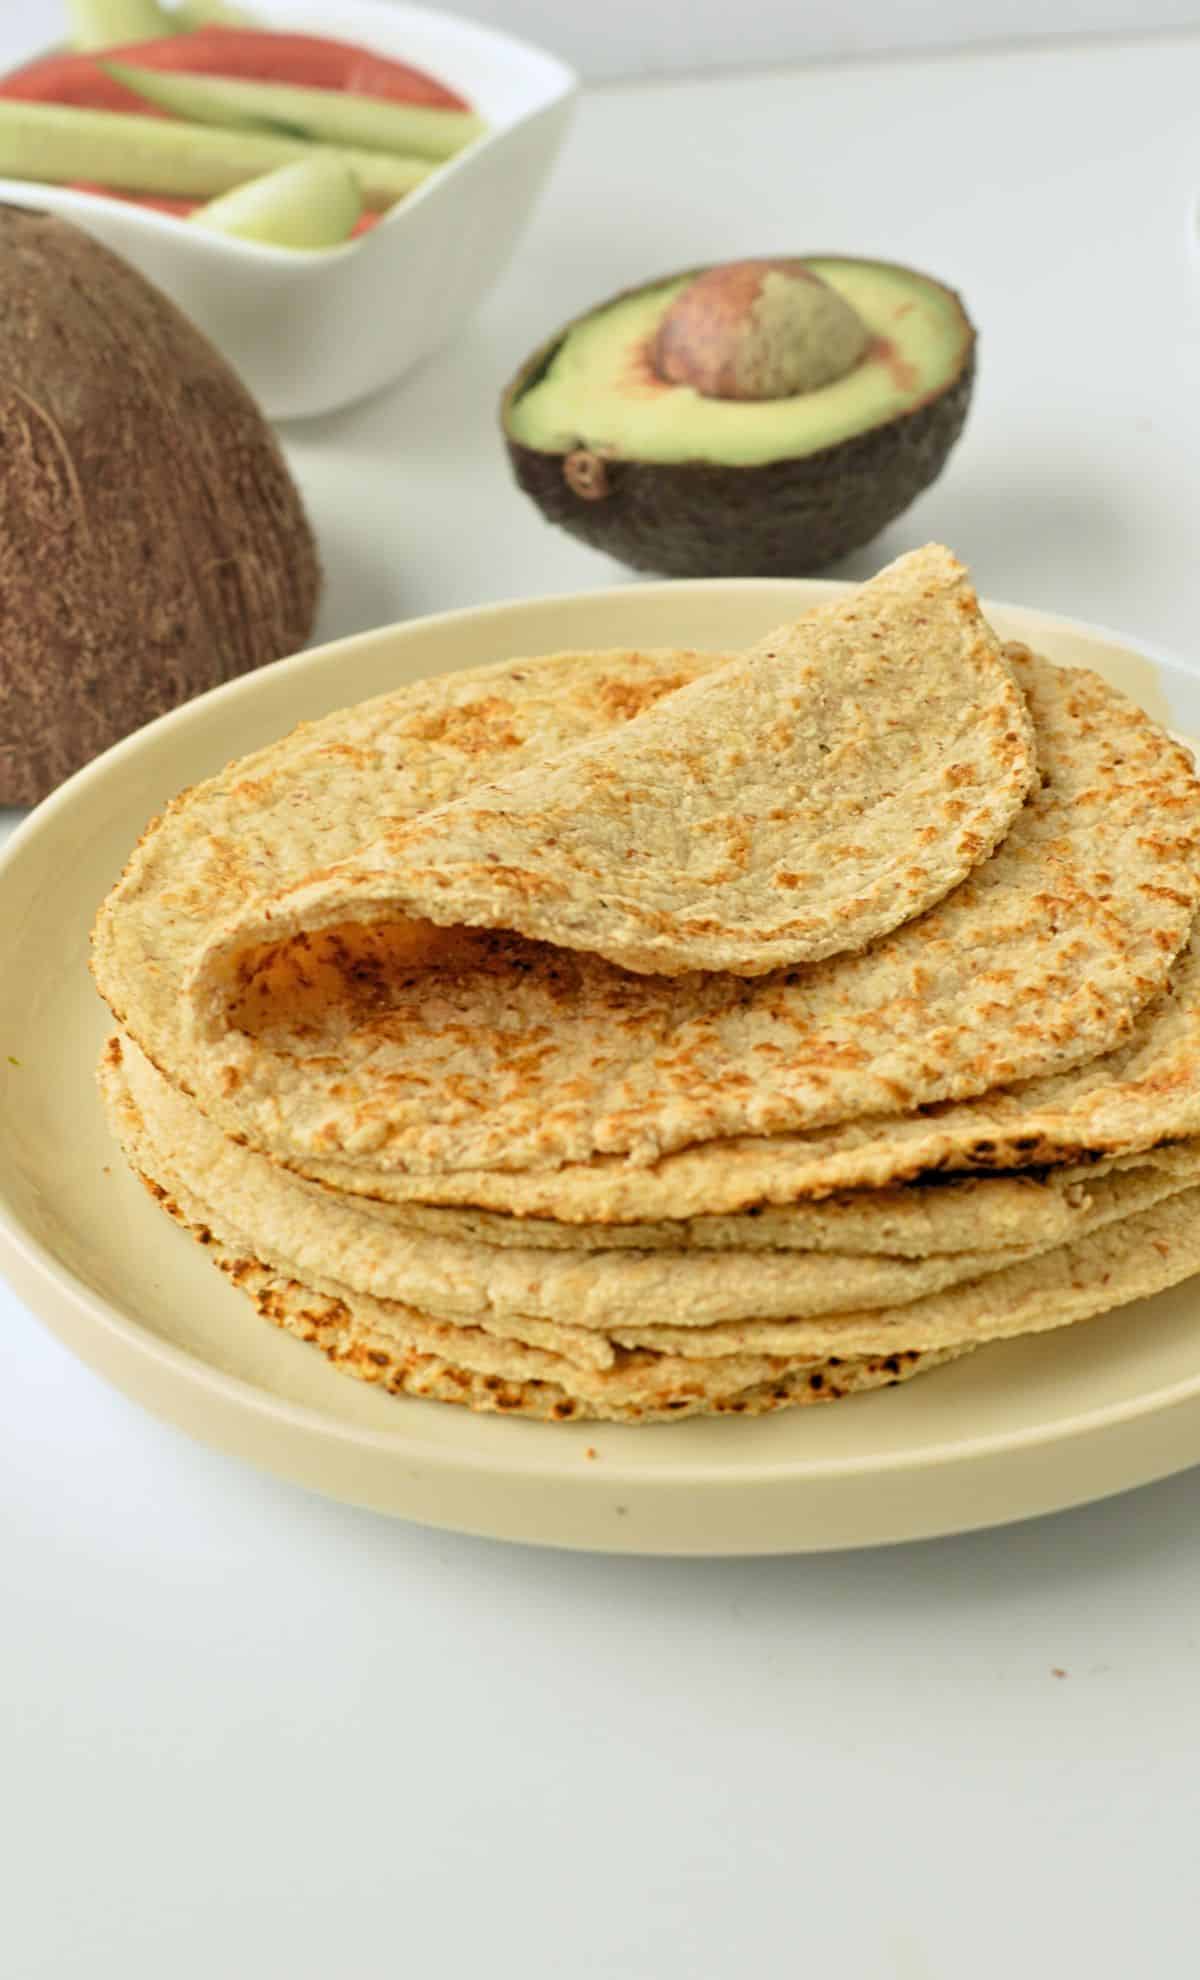 Vegan Gluten-Free Tortillas on a white plate in front of a cut avocado.